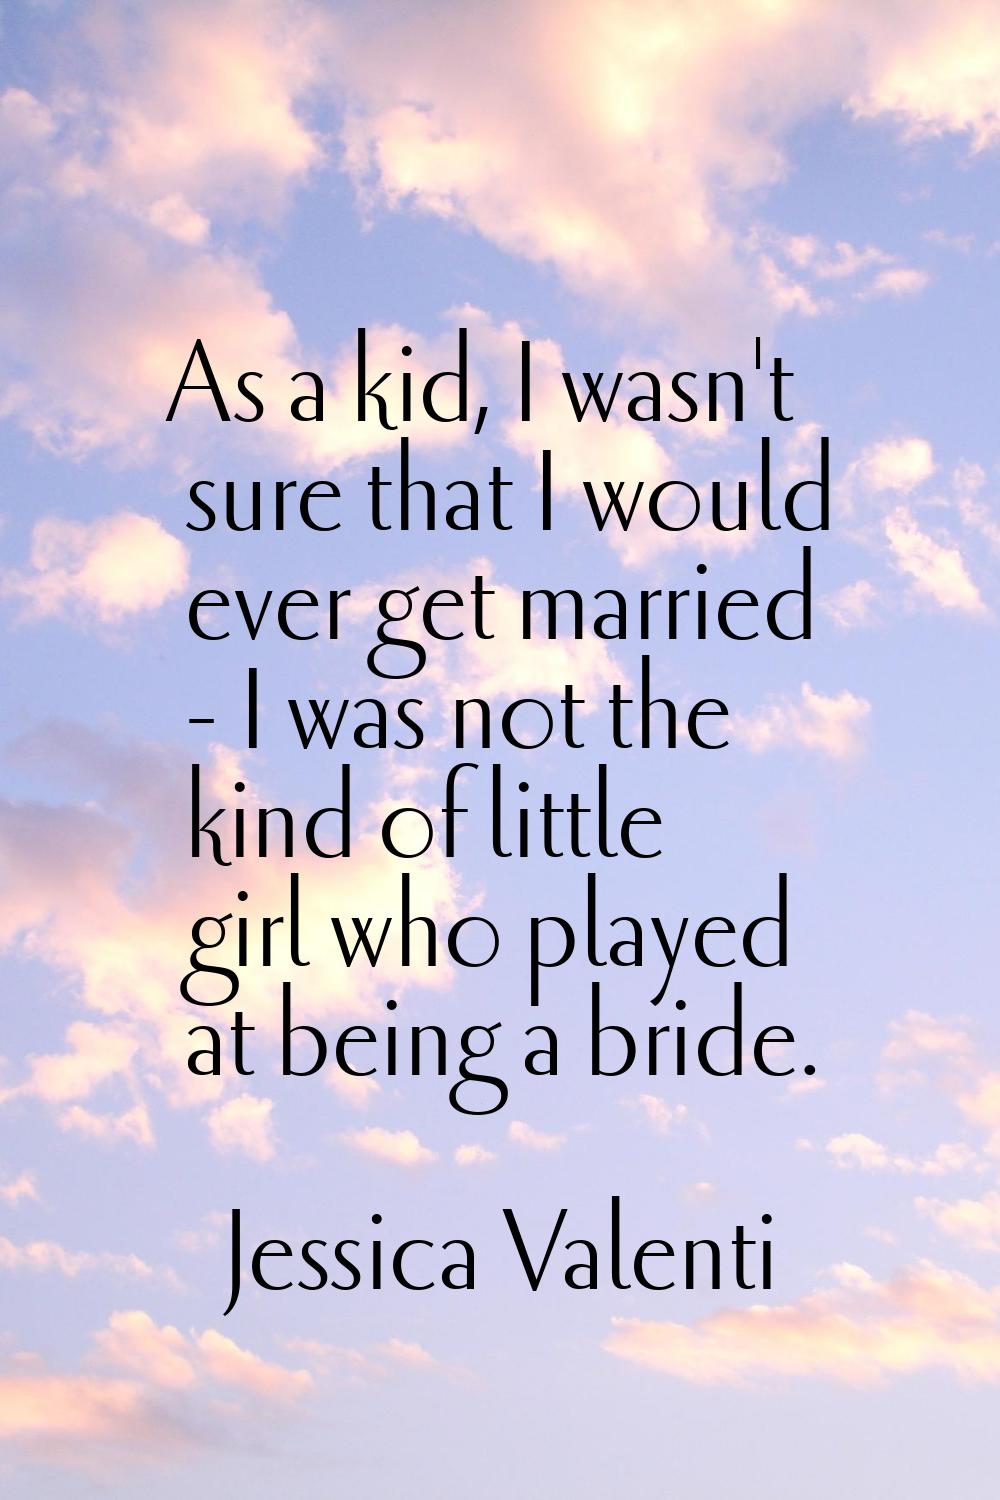 As a kid, I wasn't sure that I would ever get married - I was not the kind of little girl who playe